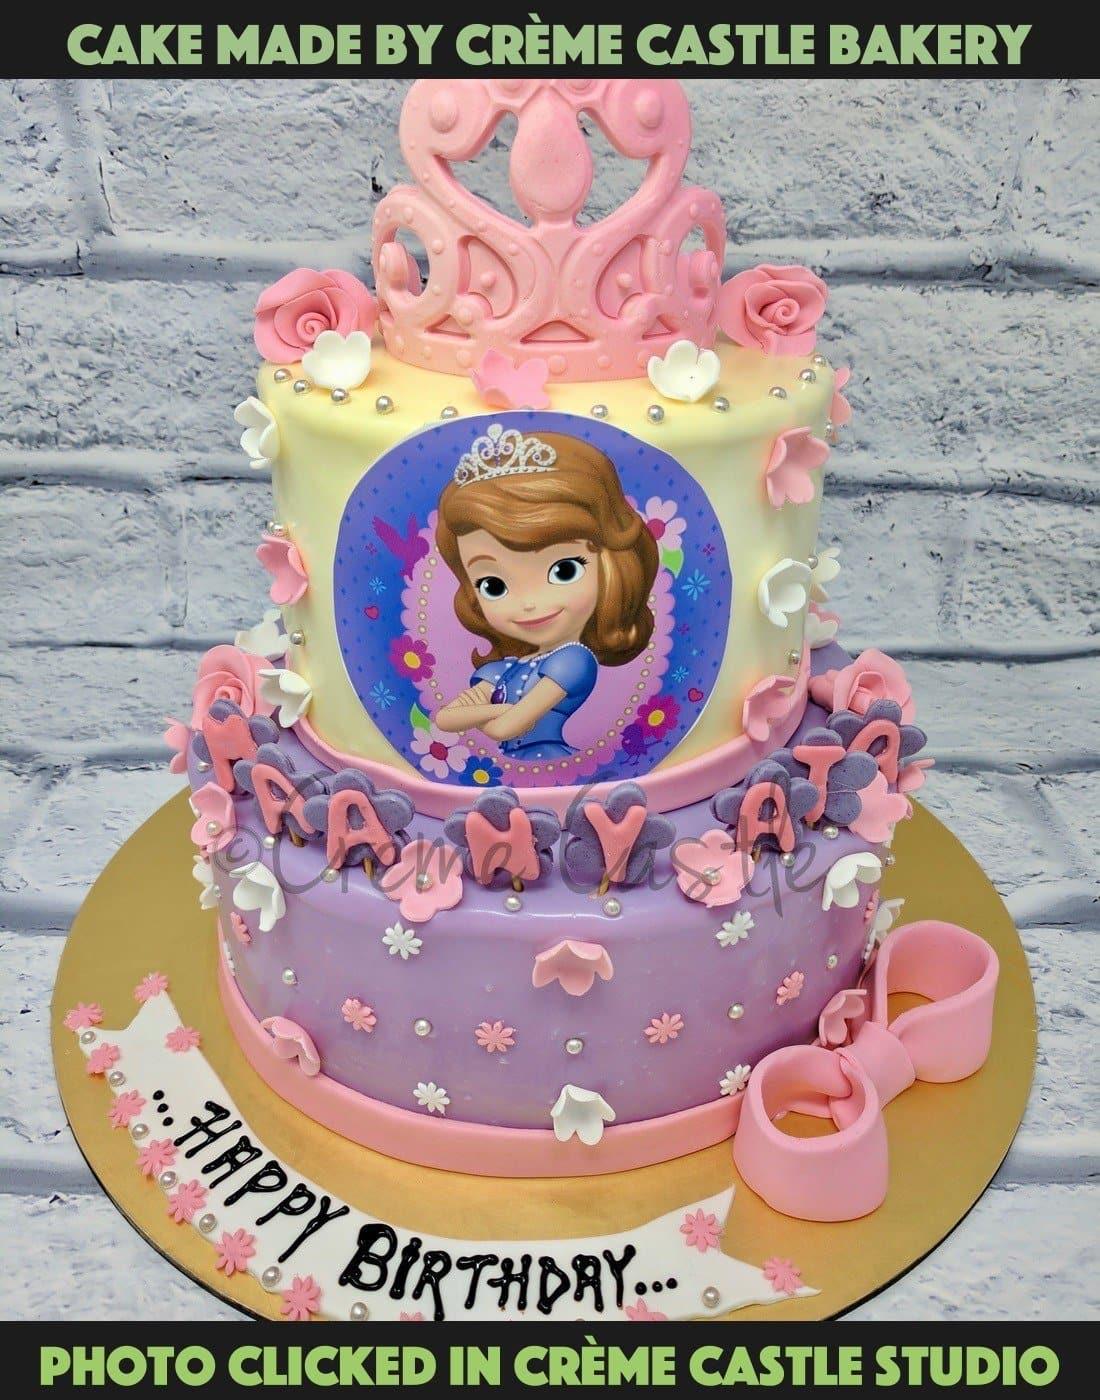 SOFIA THE FIRST PERSONALIZED BIRTHDAY CAKE TOPPER EDIBLE ICING SUGAR  7.5" Imag 1 | eBay